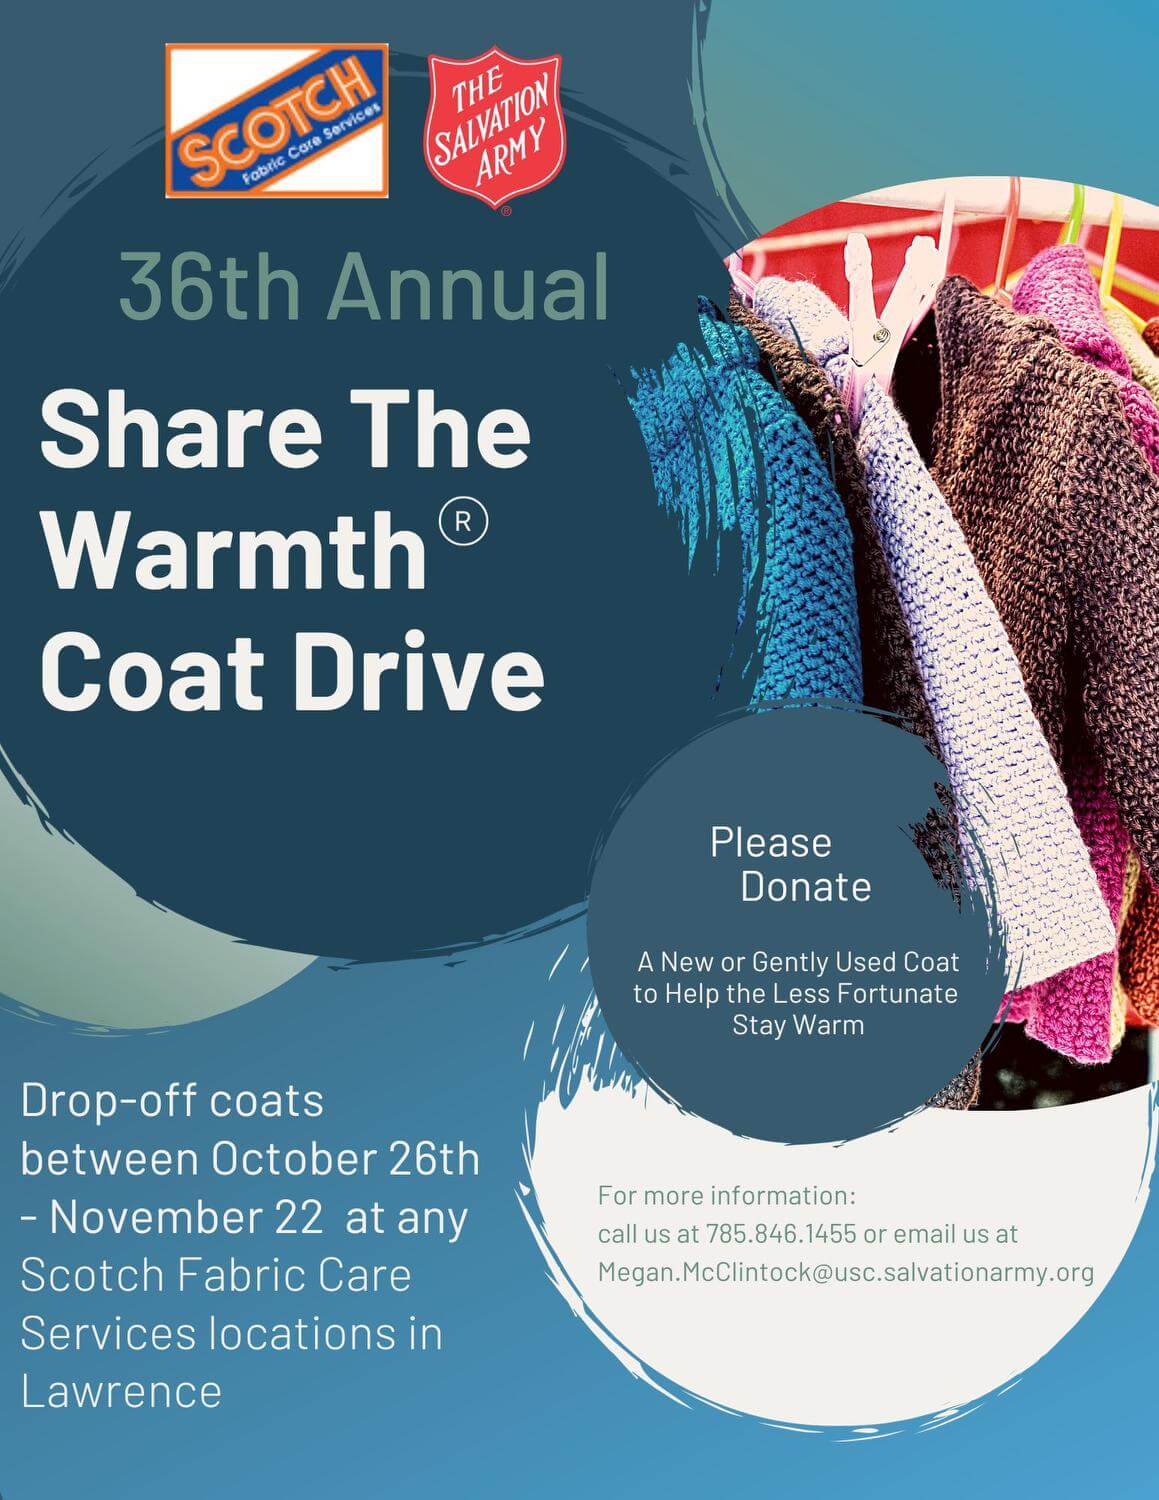 Share the warmth coat drive flyer